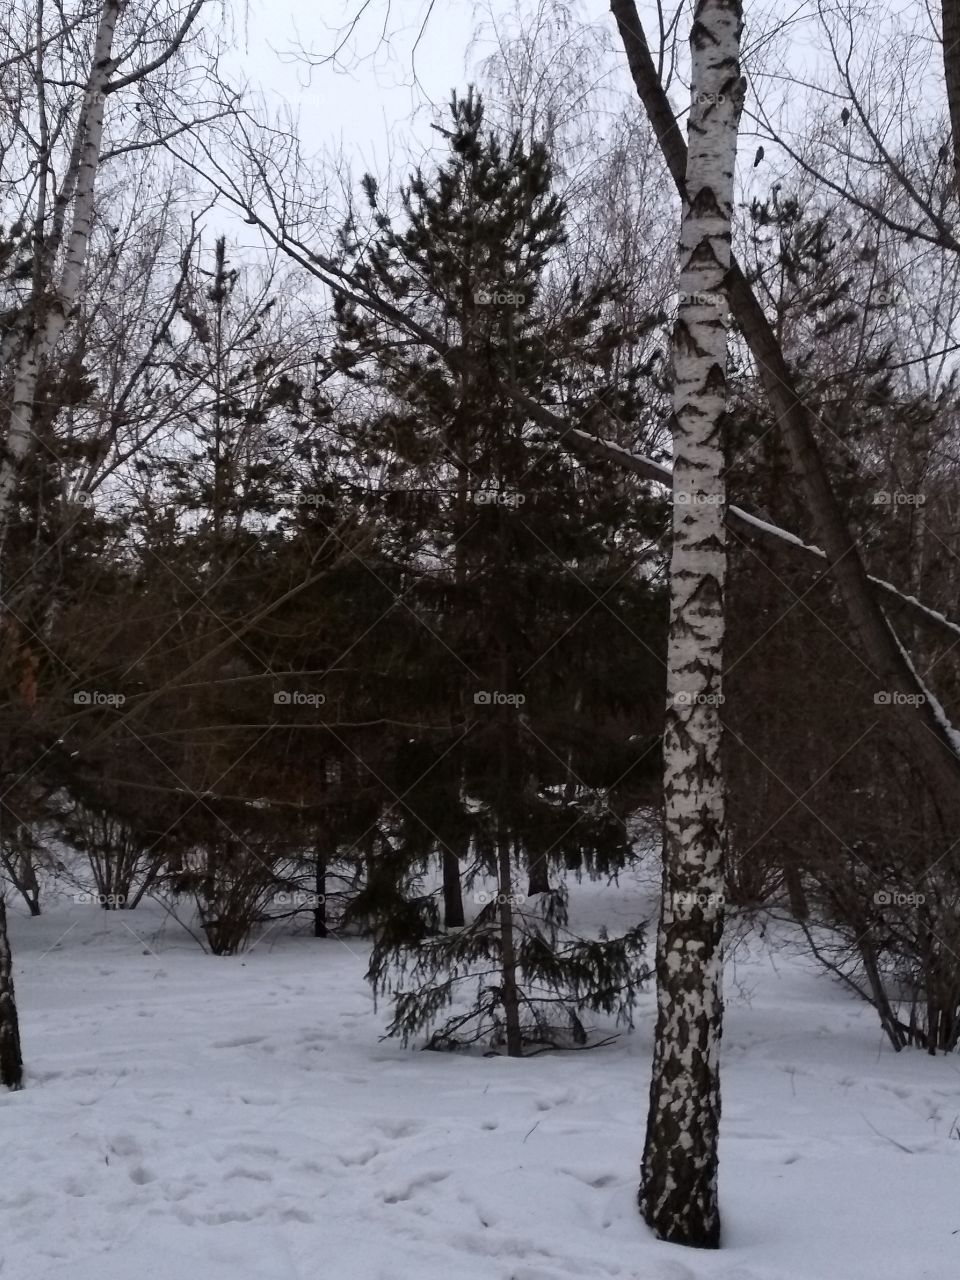 snow. birch. winter. the park. nature. coldly